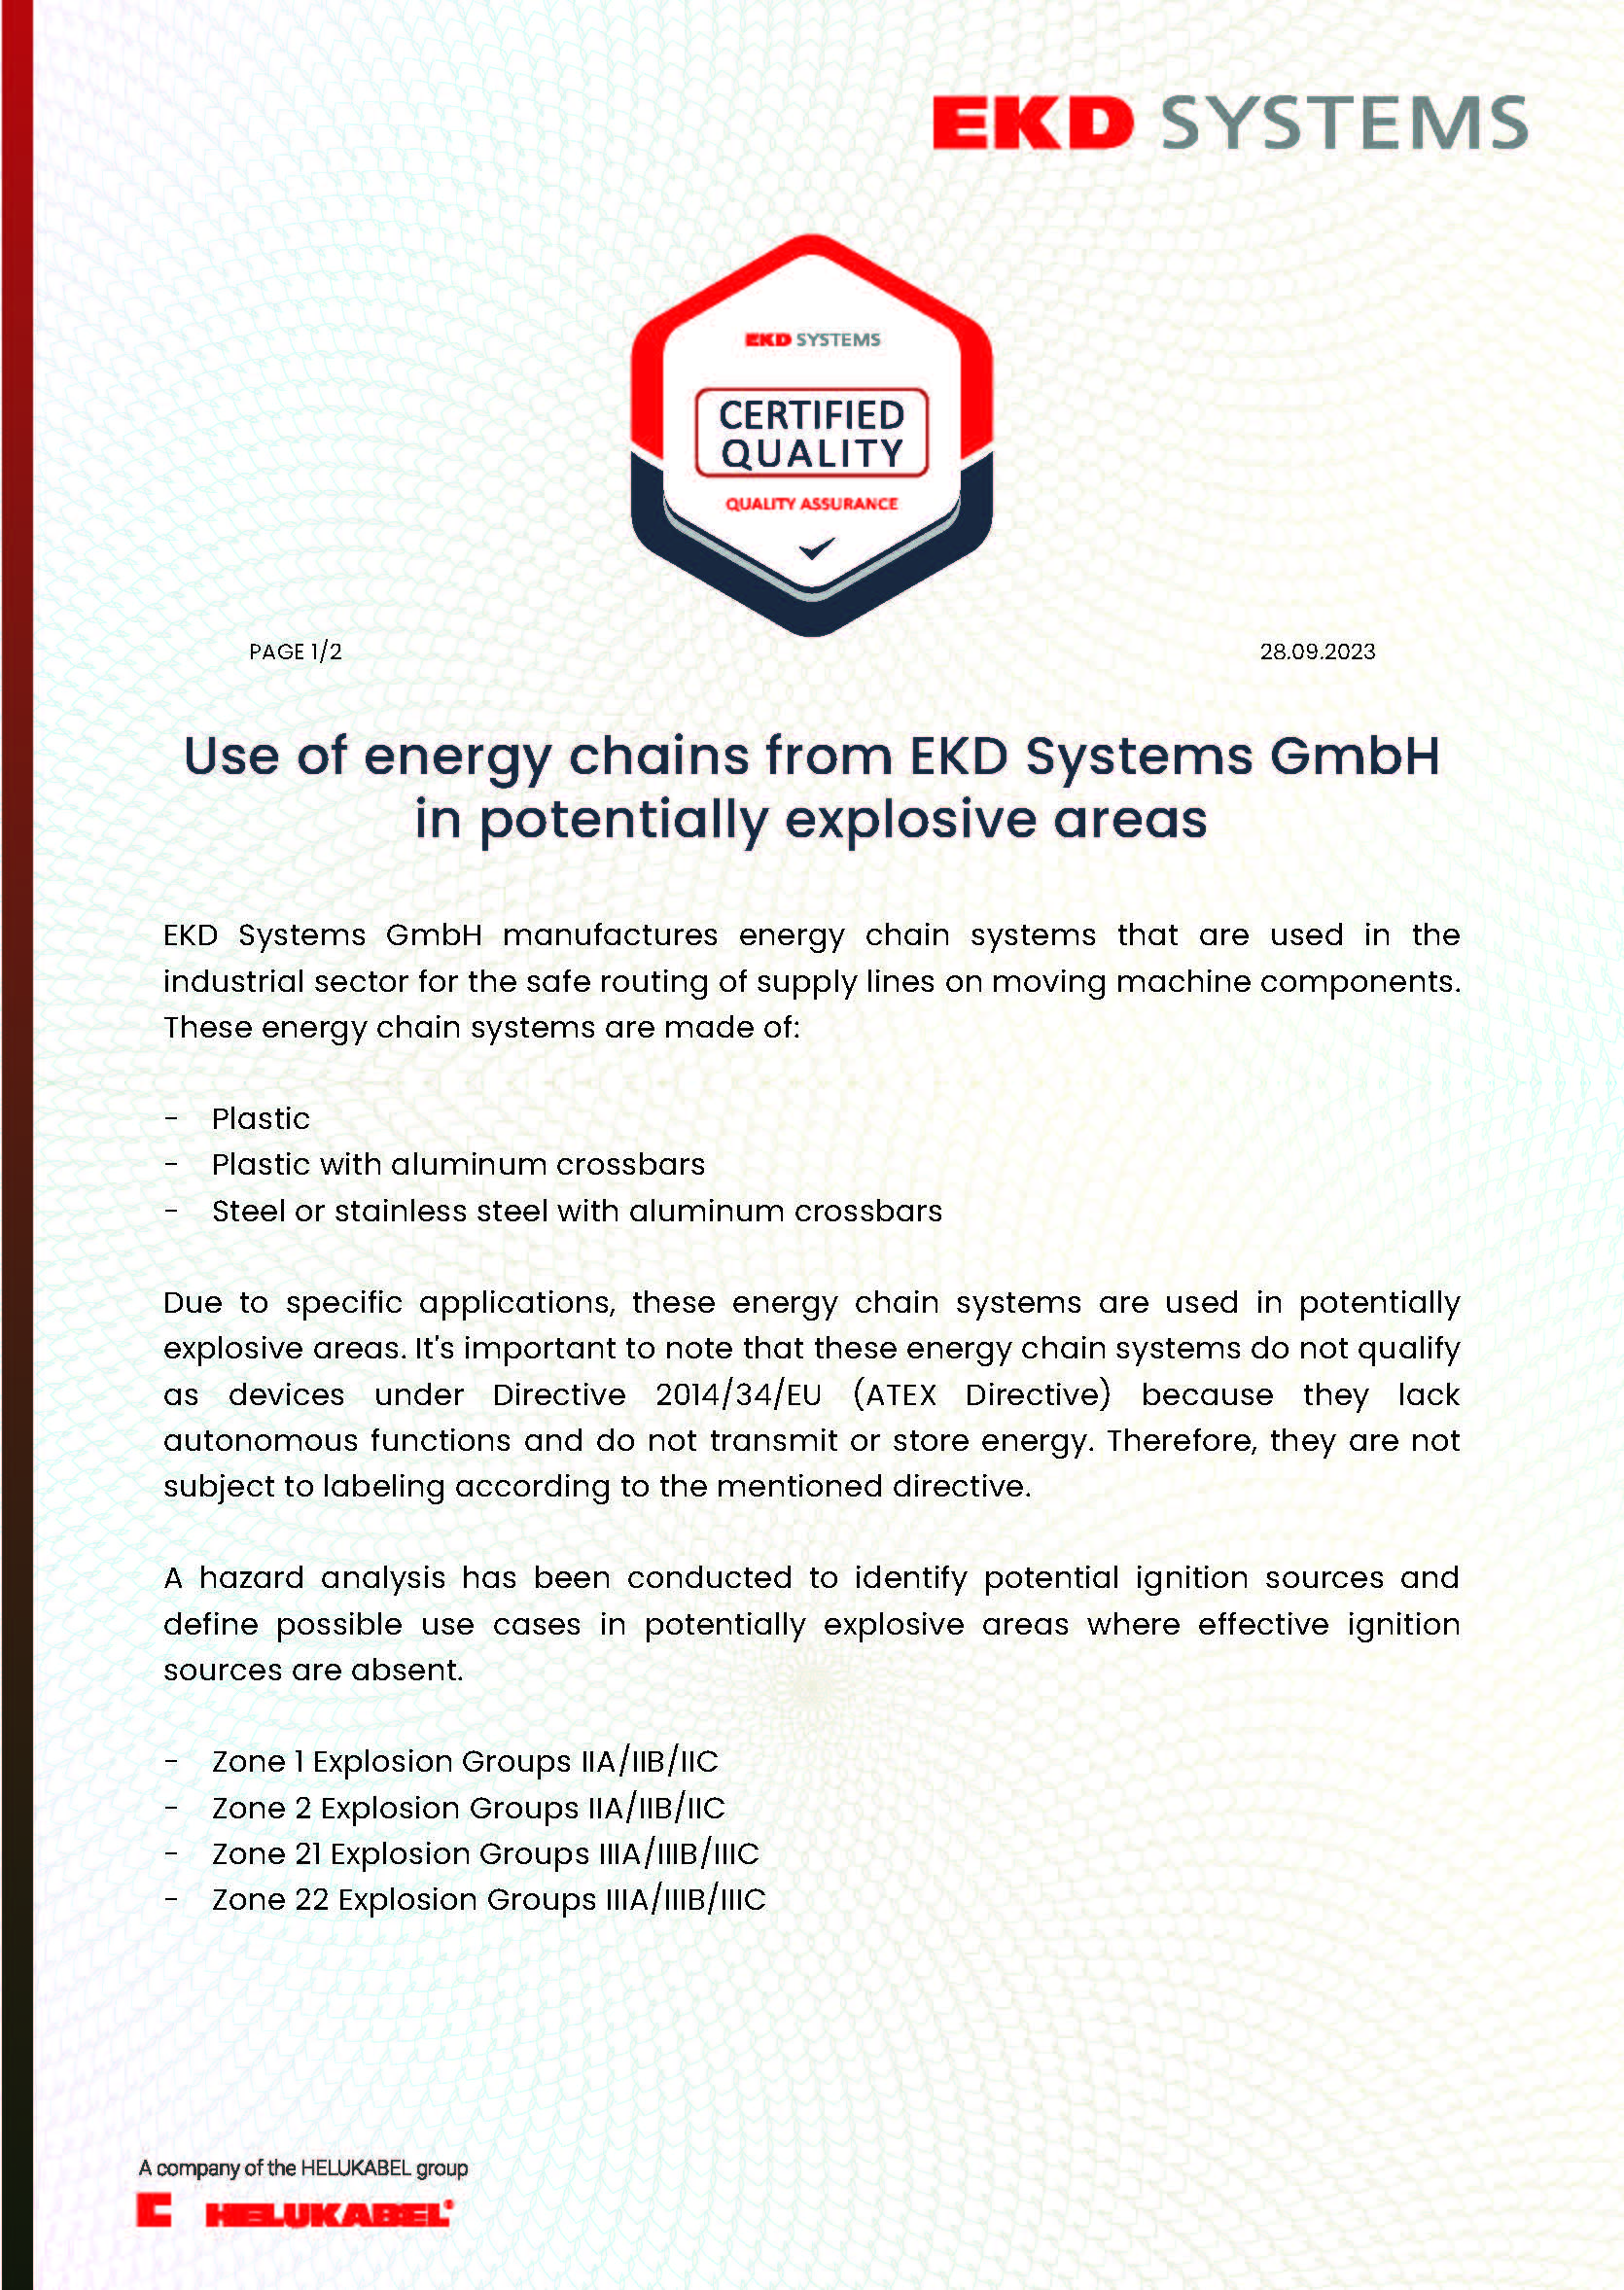 Use of energy chains from EKD Systems GmbH in potentially explosive areas